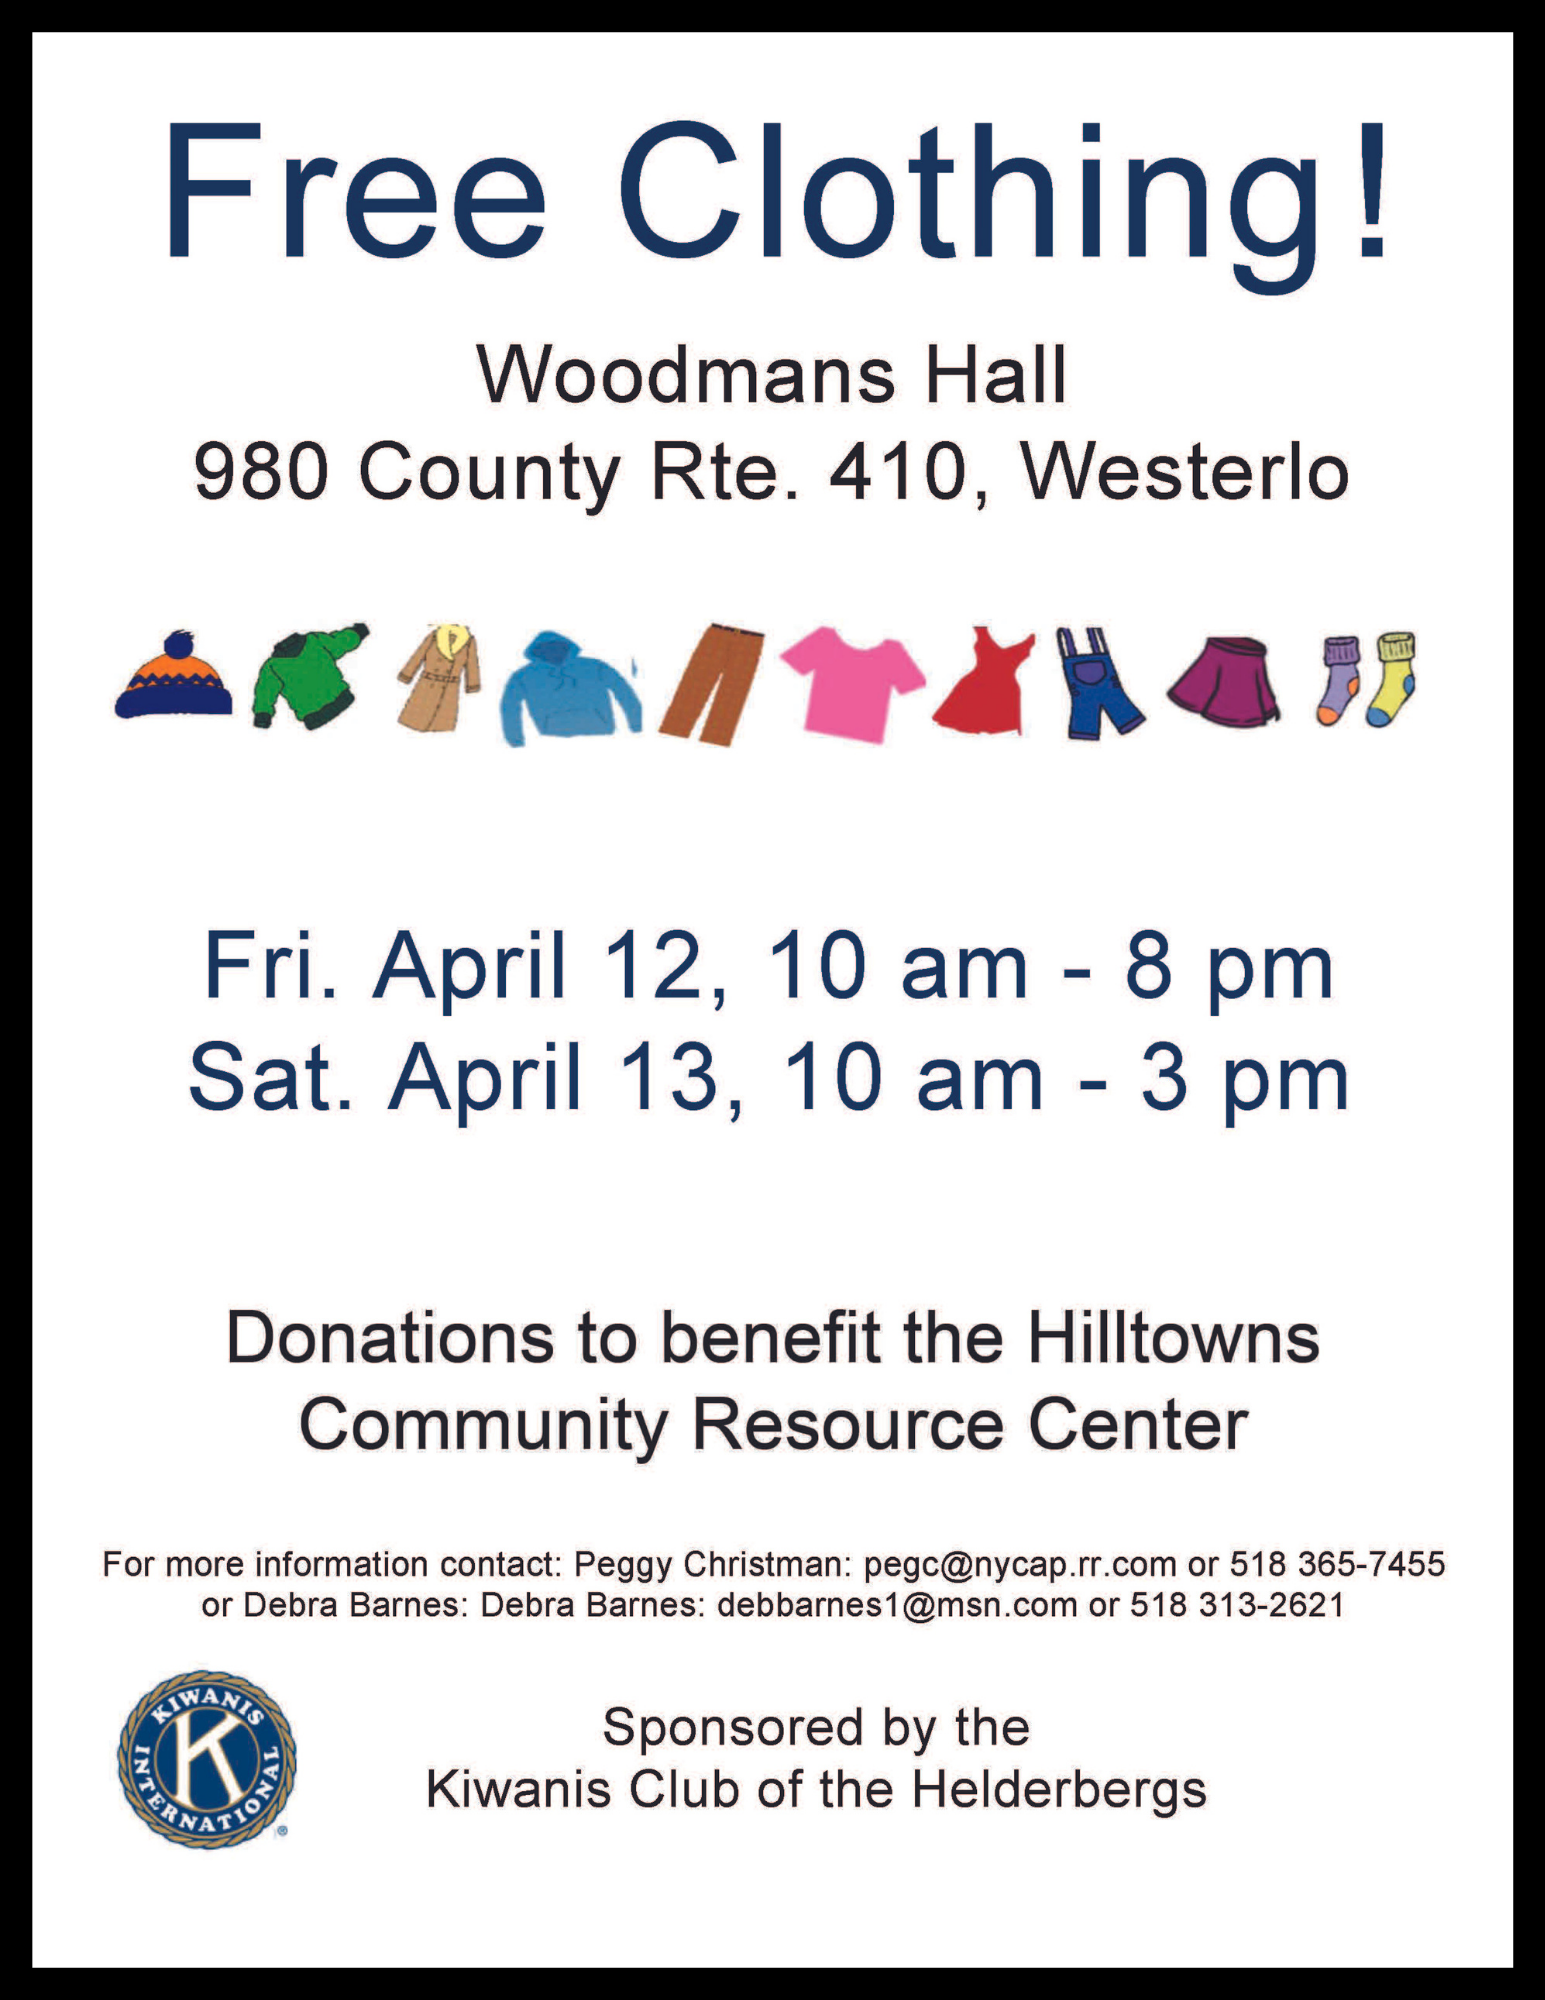 Free Clothing

Woodmans Hall 
980 County Rte.410, Westerlo

Fri. April 12, 10am-8pm
Sat. April 13, 10am-3pm
 
Donations to benefit the Hilltown Community Resource Center.

For more information contact:PeggyChristman:pegc@nycap.rr.comor 518-365-7455
or Debra Barnes: debbarnes1@msn.com or 518-313-262

Sponsoredbythe Kiwanis Club of the Helderbergs